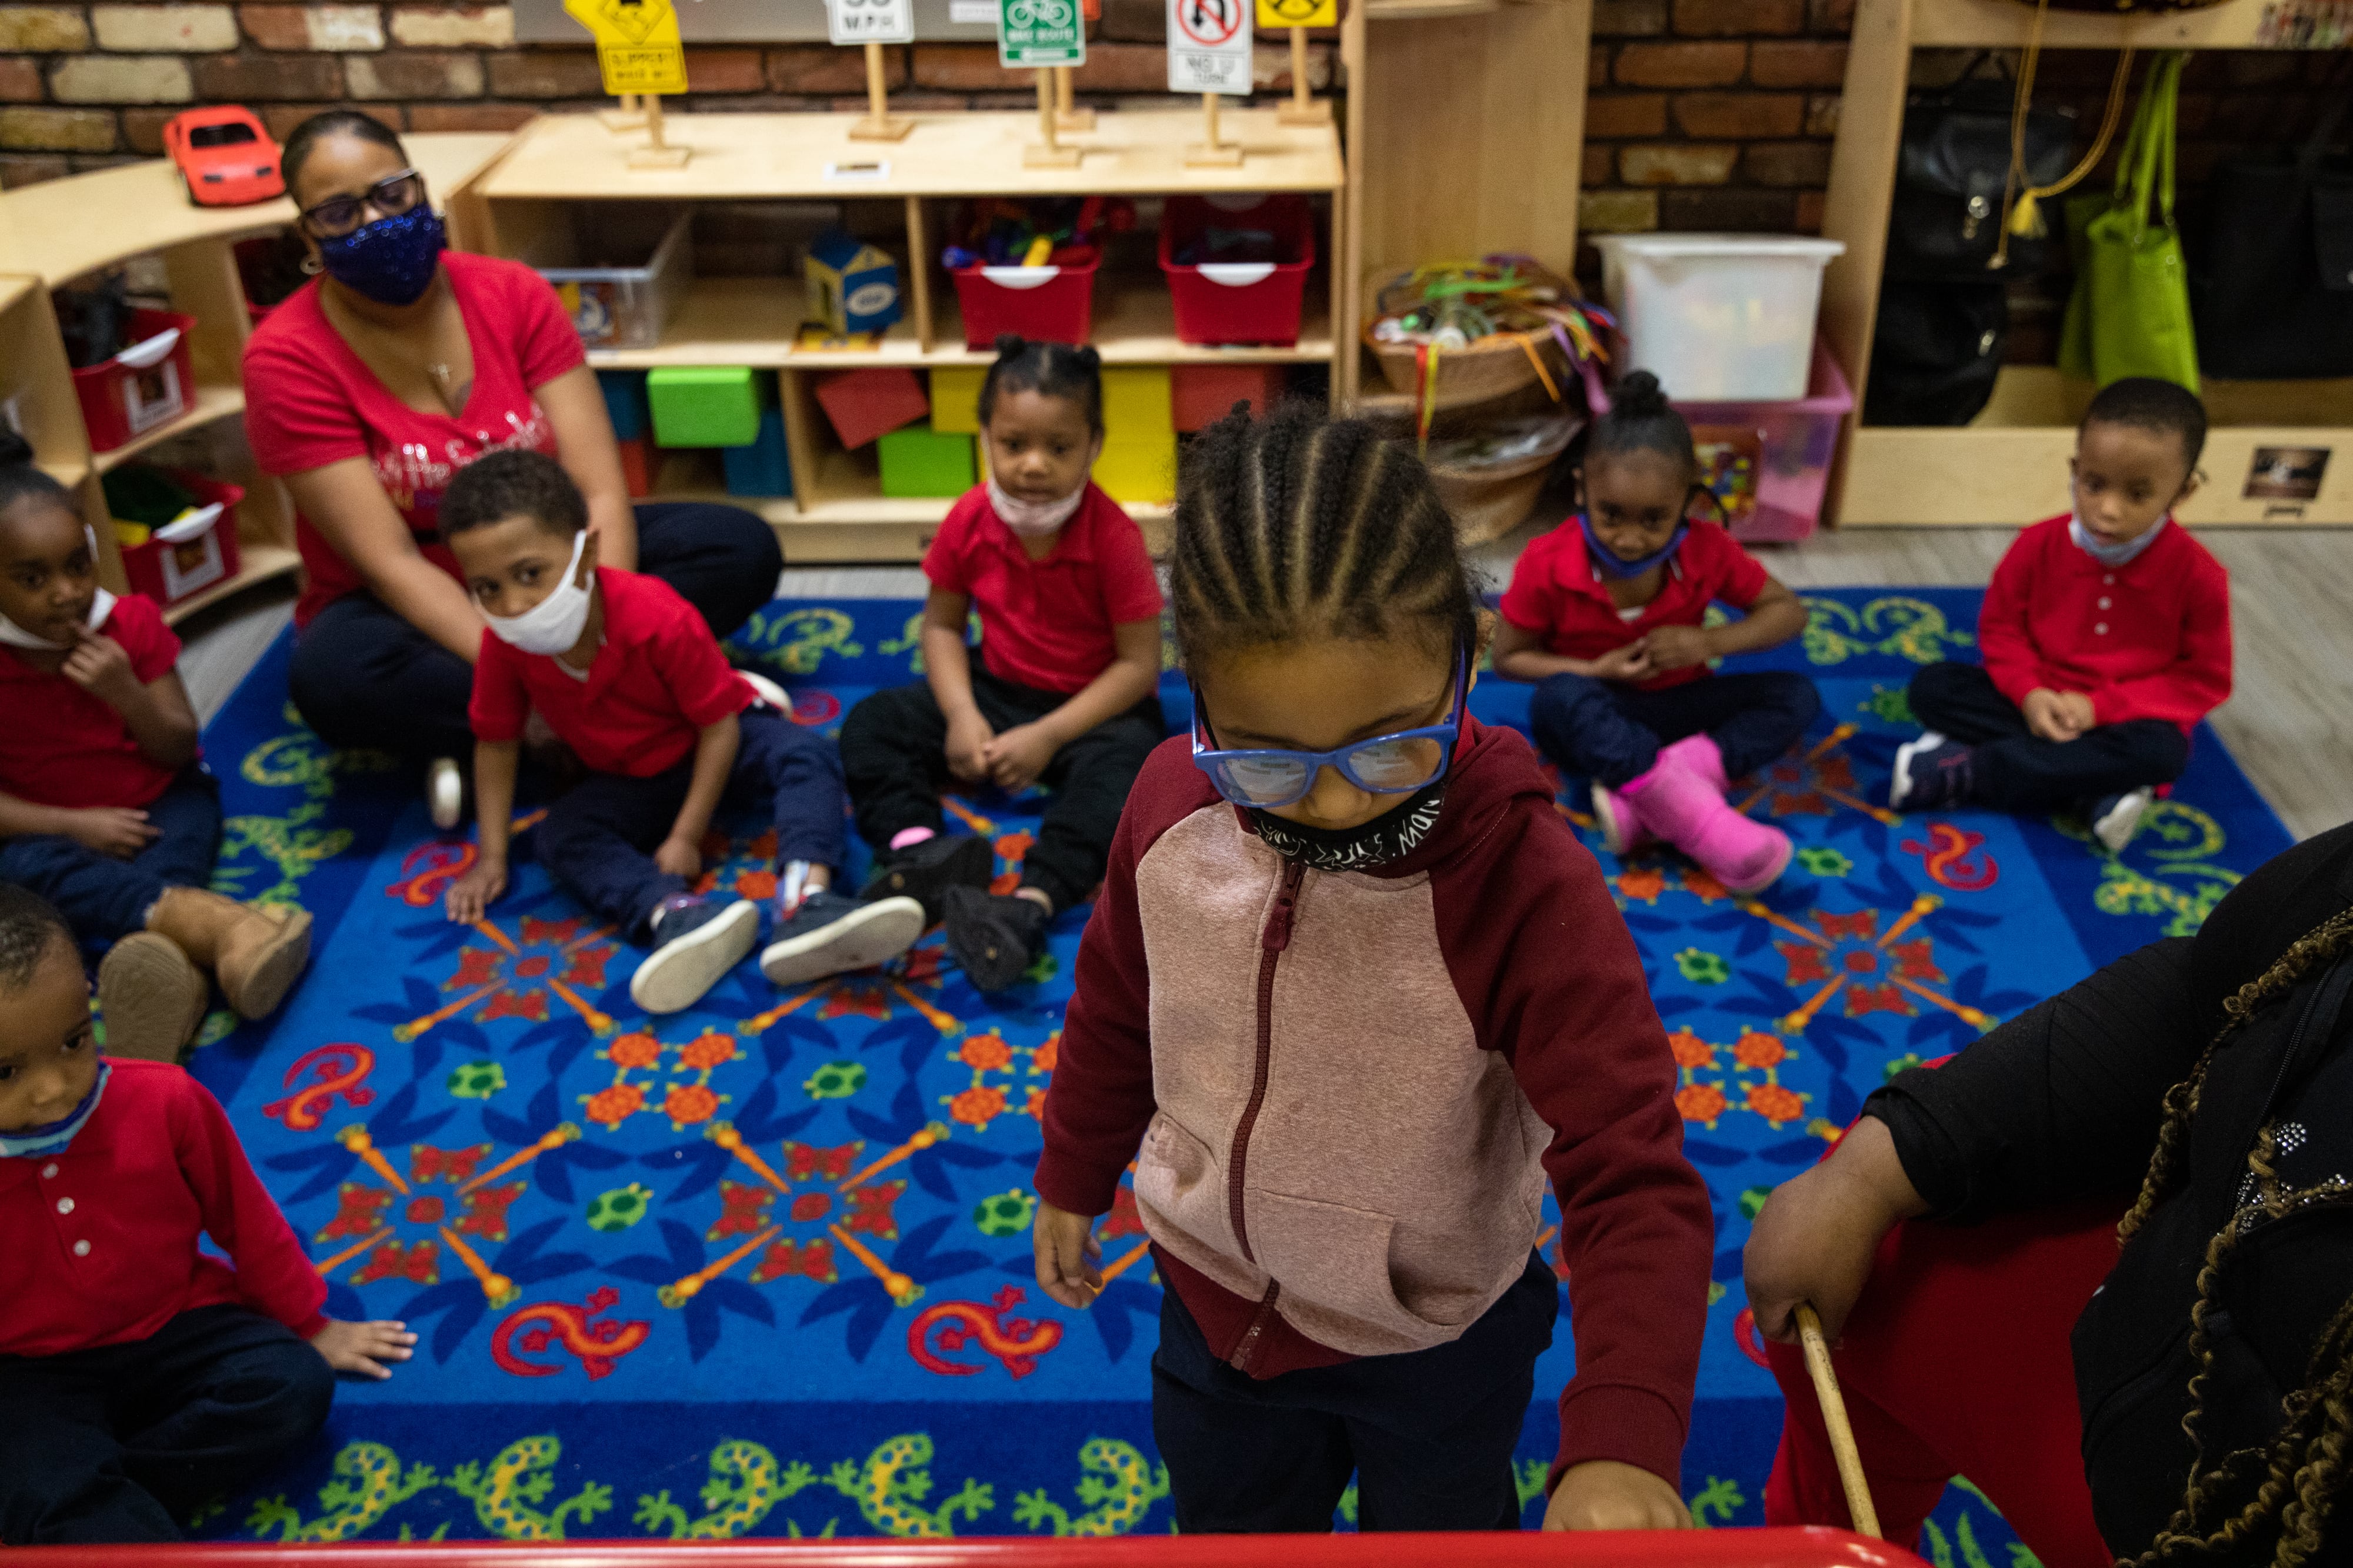 A group of children and a teacher wearing red shirts and dark pants sit on a patterned blue rug wearing masks and watching as a student with cornrows and glasses works on an activity at a whiteboard.